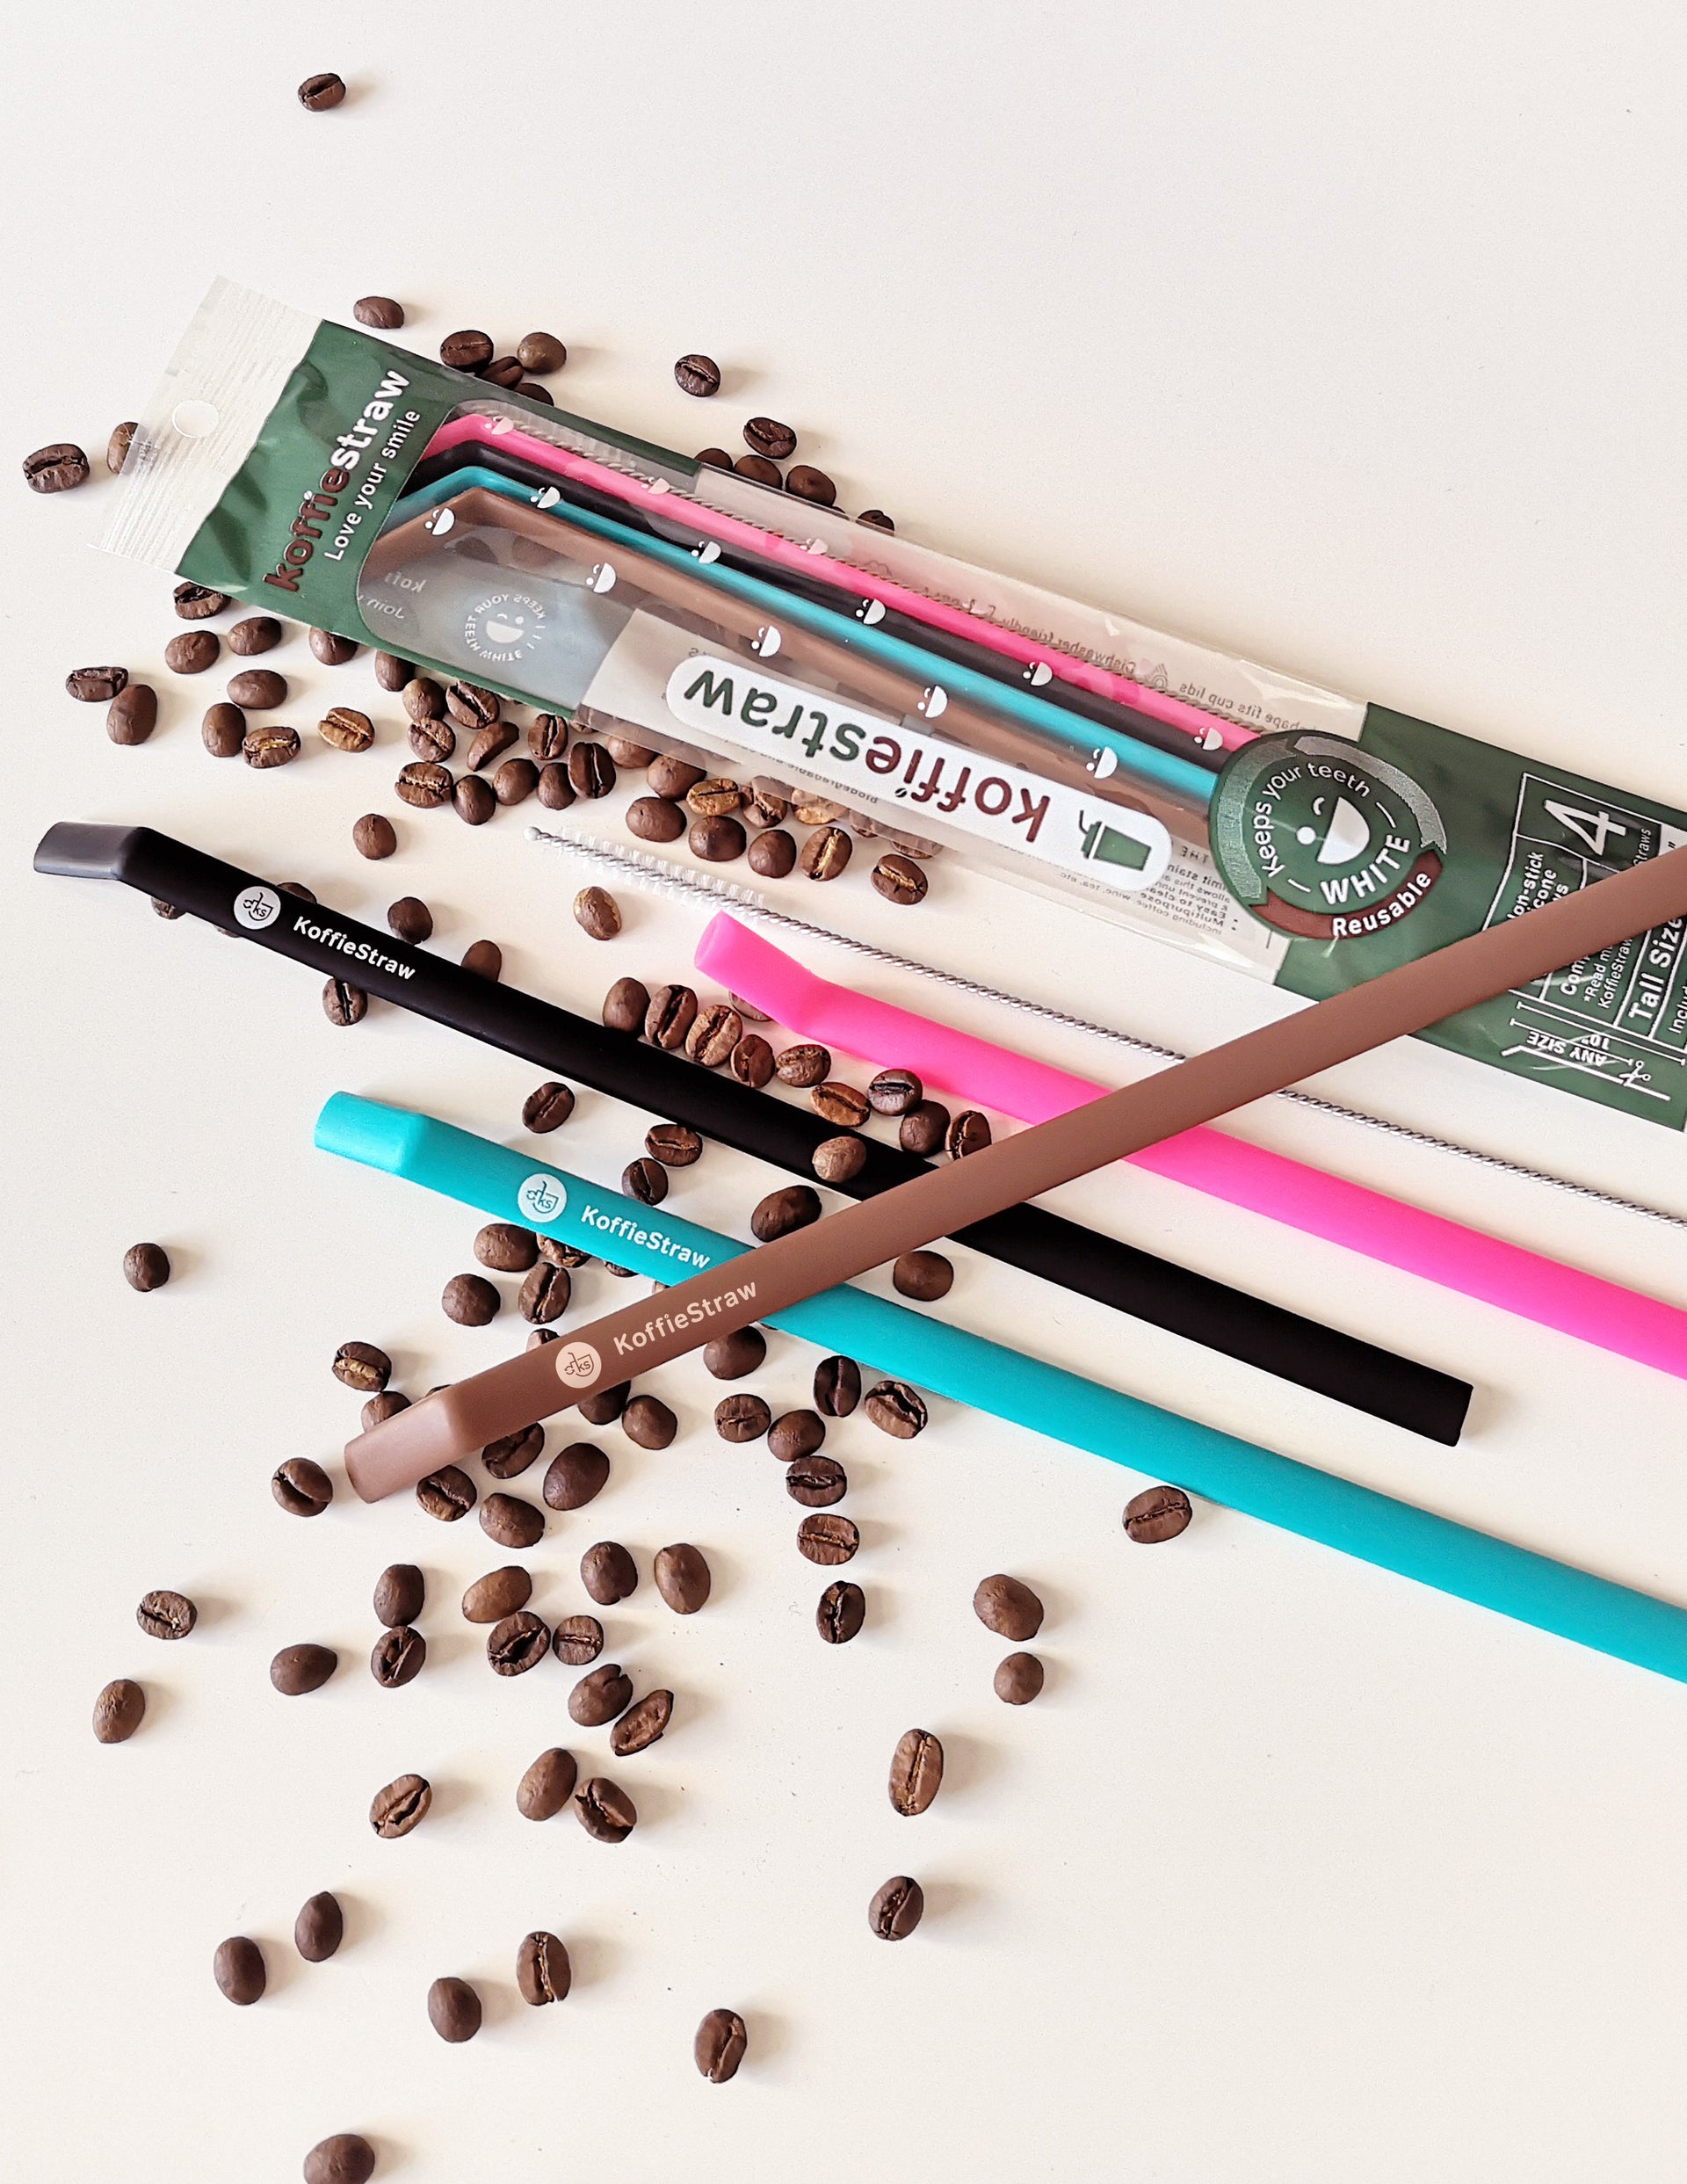 Koffie Straw MOCHA in both sizes (2 straws: 8, 10, and a brush)